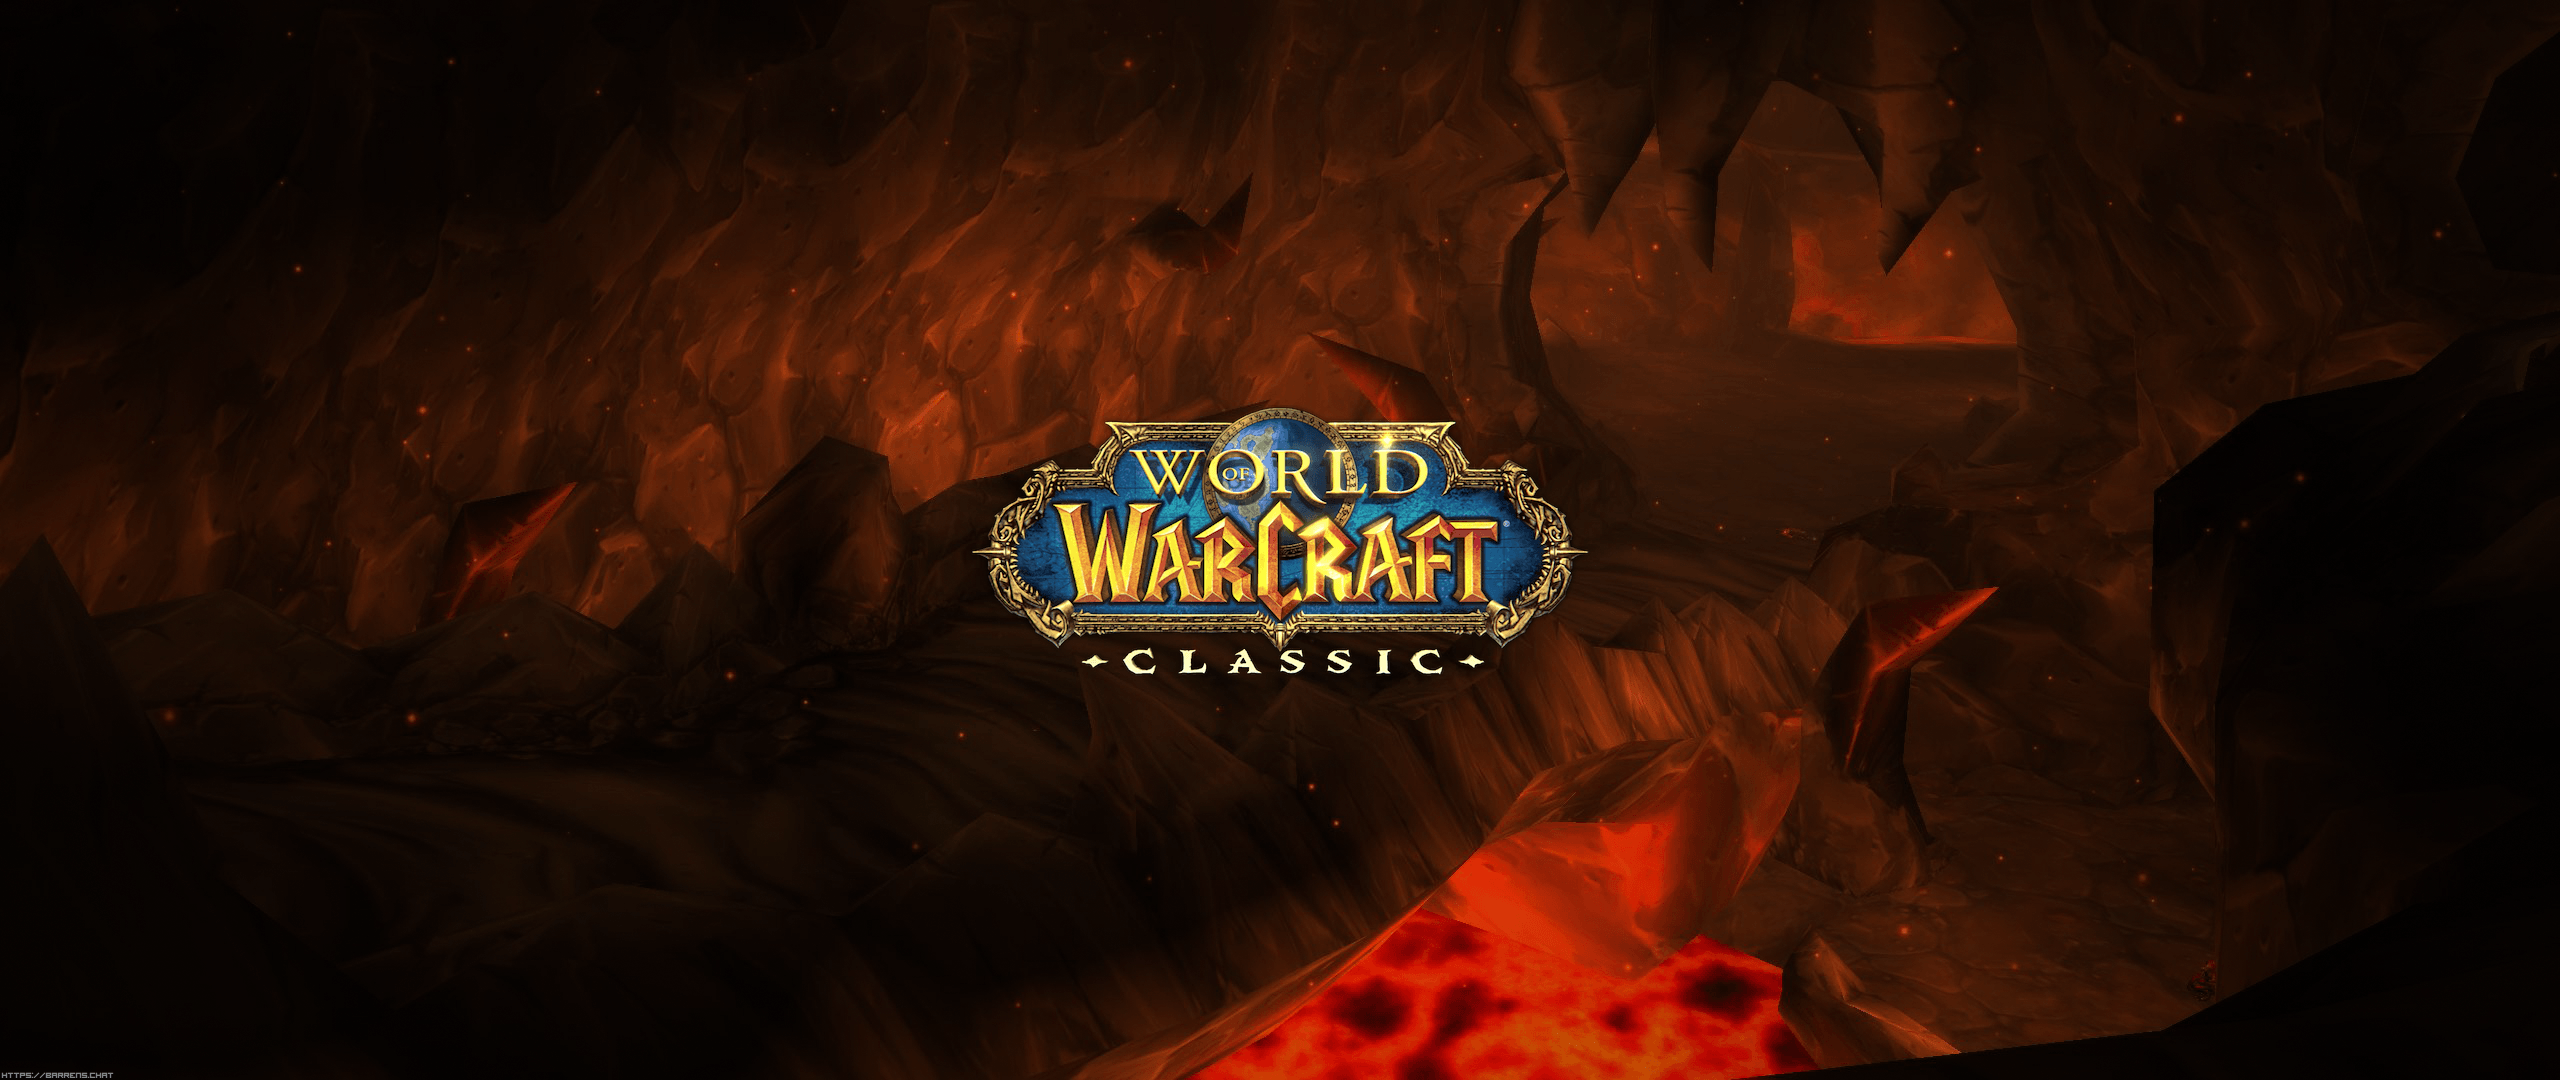 Ultrawide Wallpaper • Each Dungeon and Raid • WoW Classic • Barrens